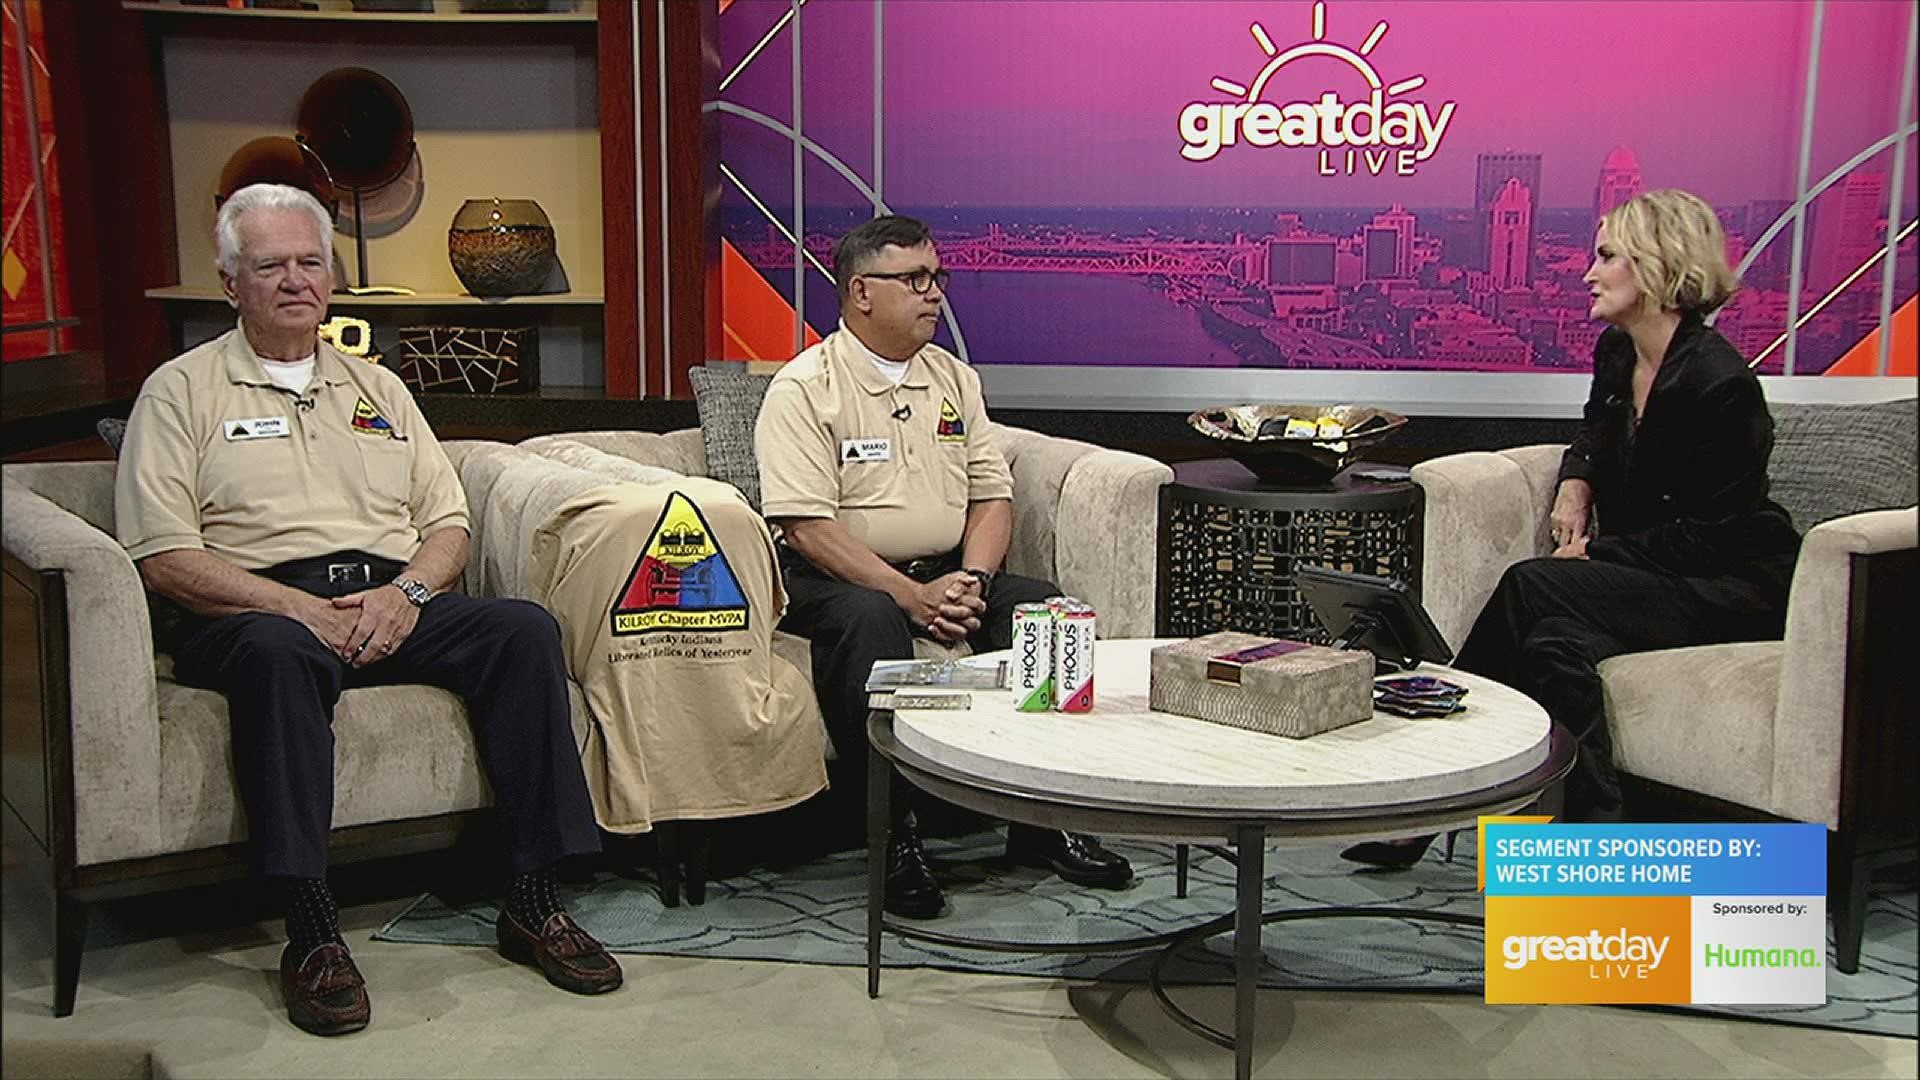 Kilroy Chapter Military Vehicle Preservation Association on Great Day Live!